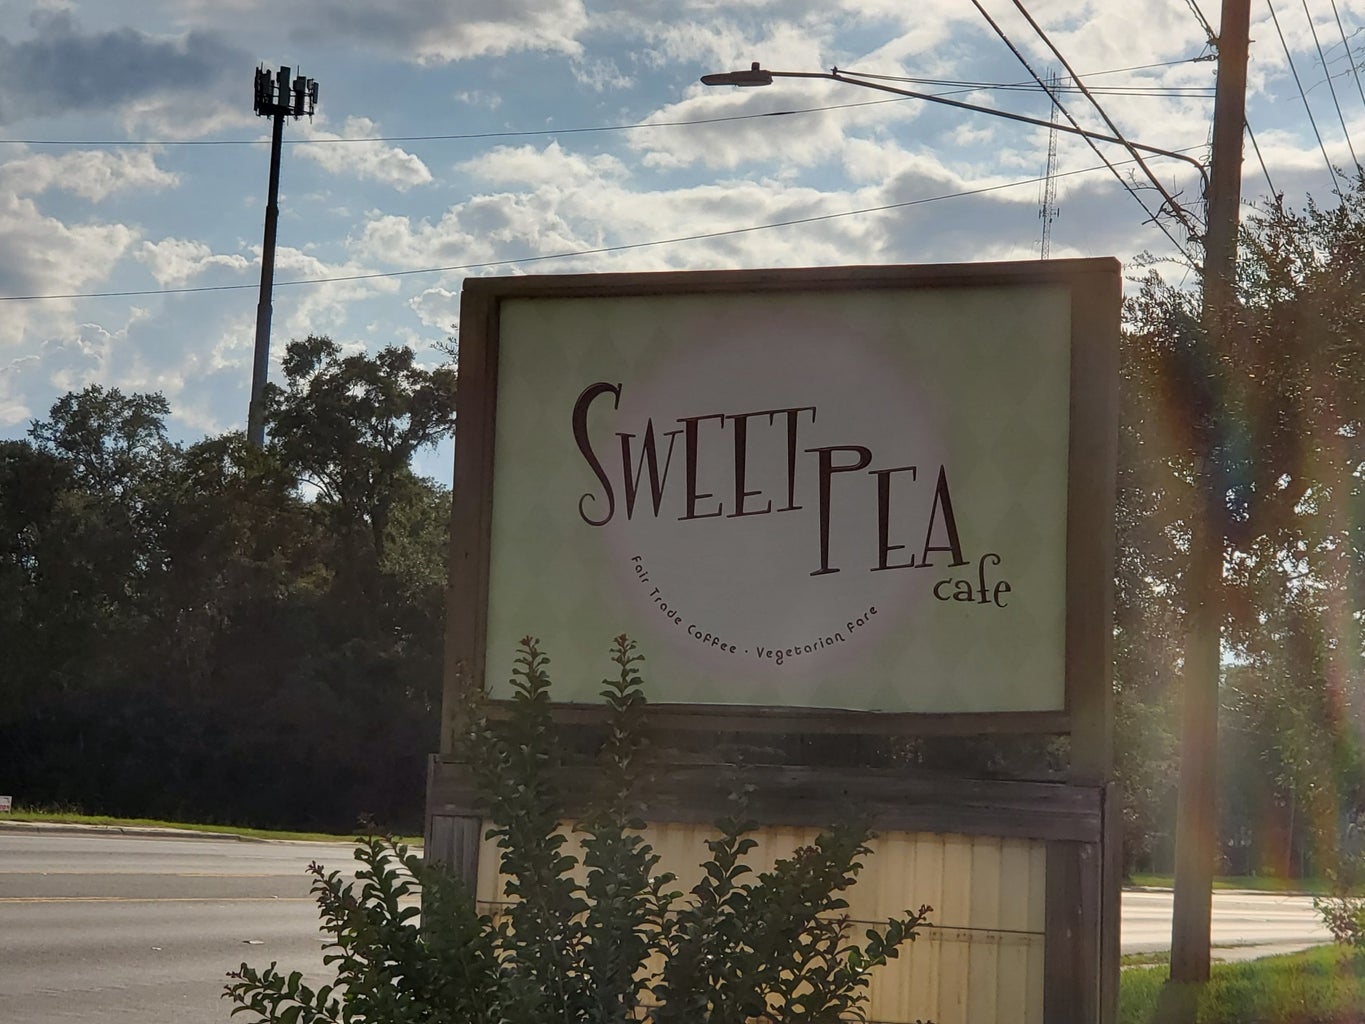 Sweet Pea Cafe exterior